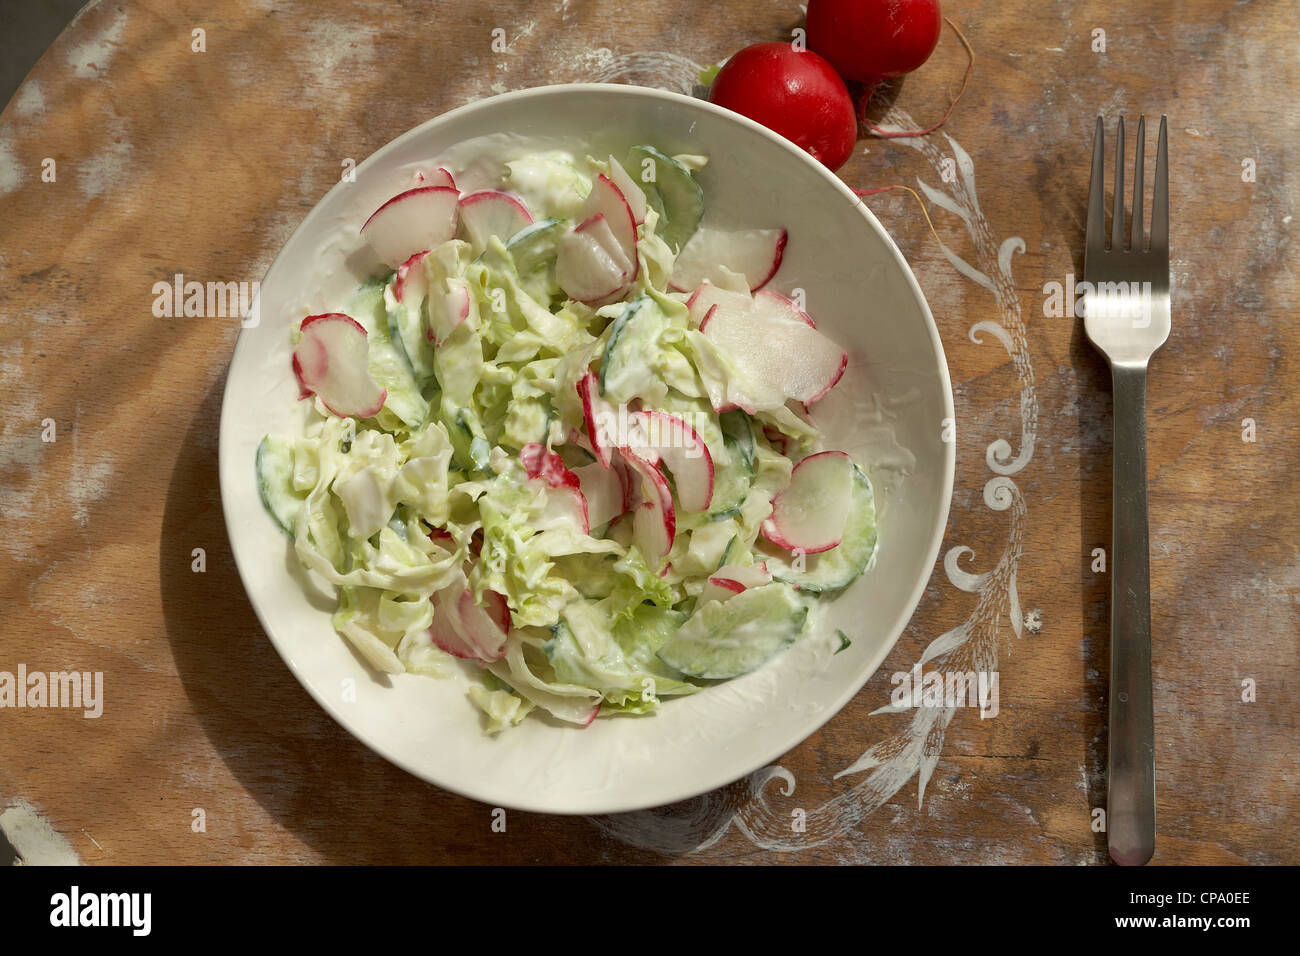 healthy food, Low Fat salat, organic green salad, on plate, summer lunch Stock Photo